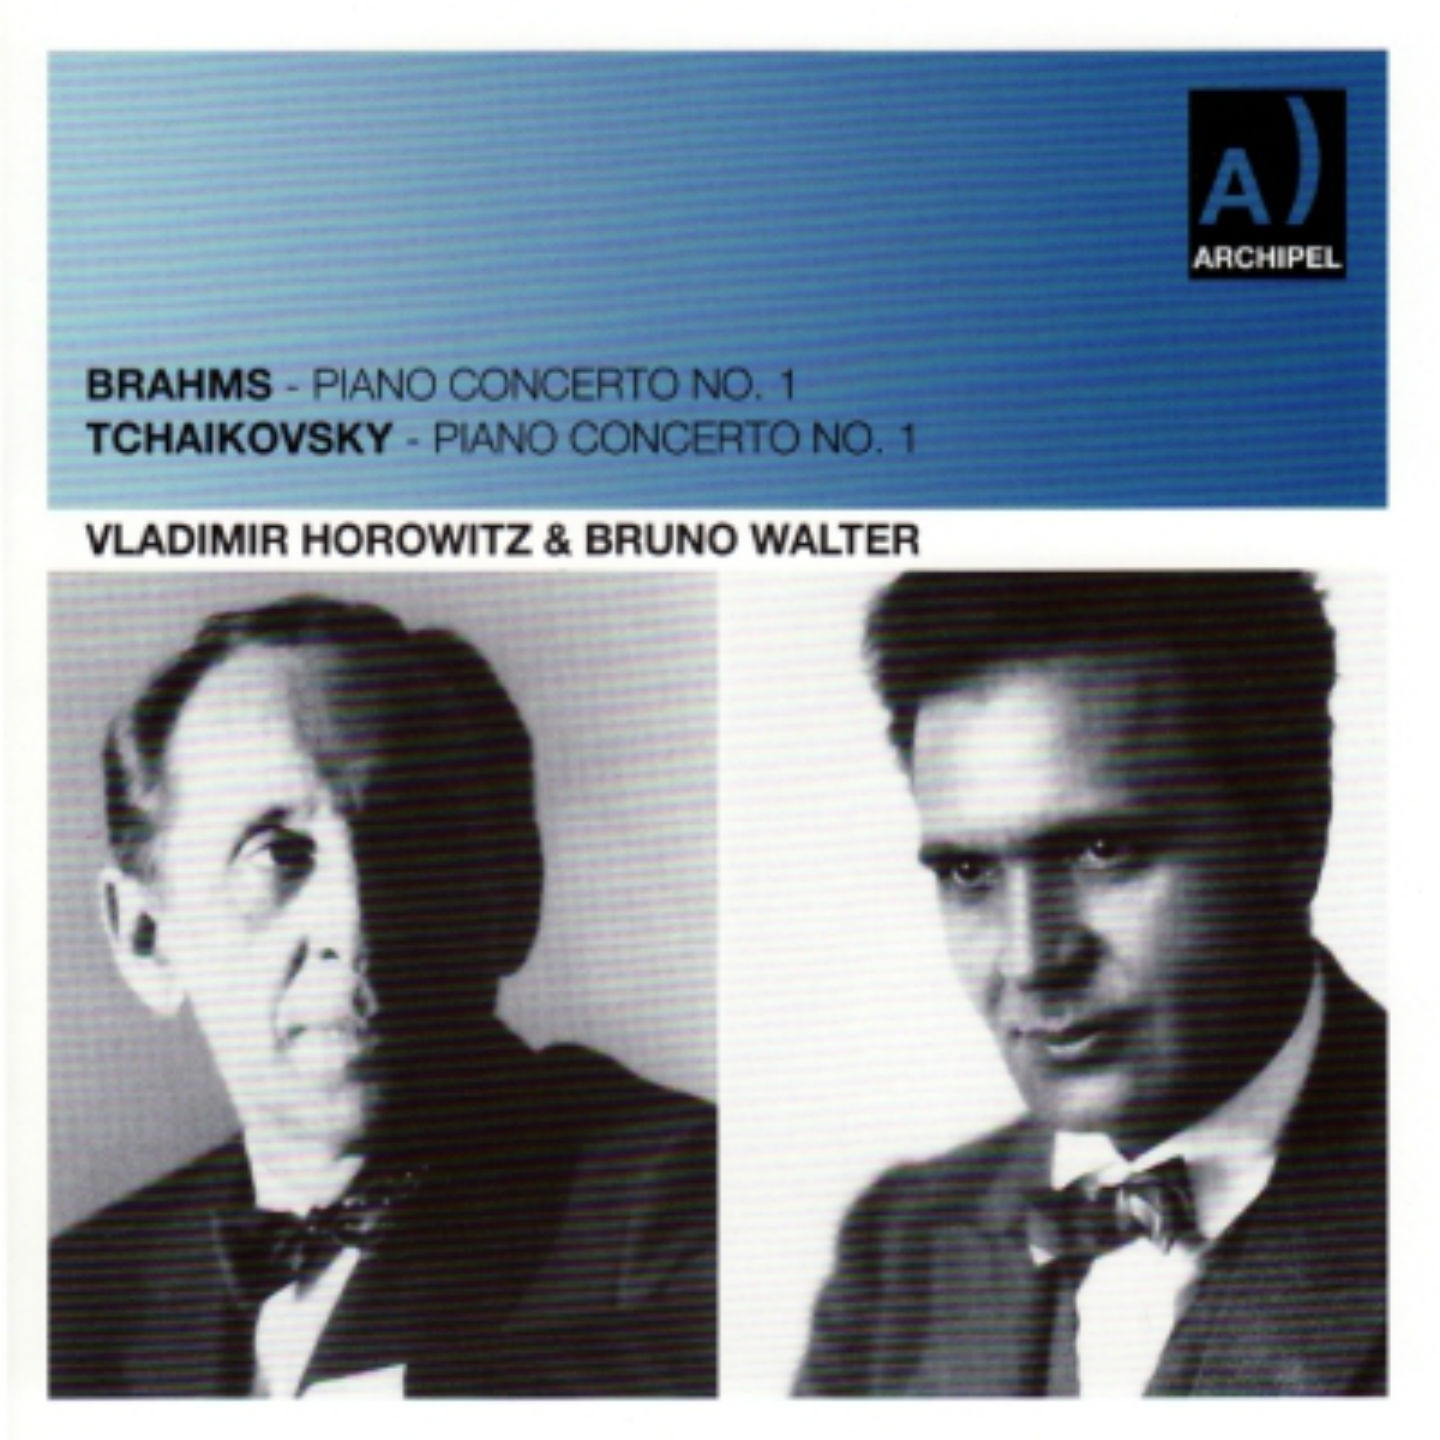 Concerto for Piano and Orchestra No. 1 in D Minor, Op. 15: I. Maestoso (Pt. 2)